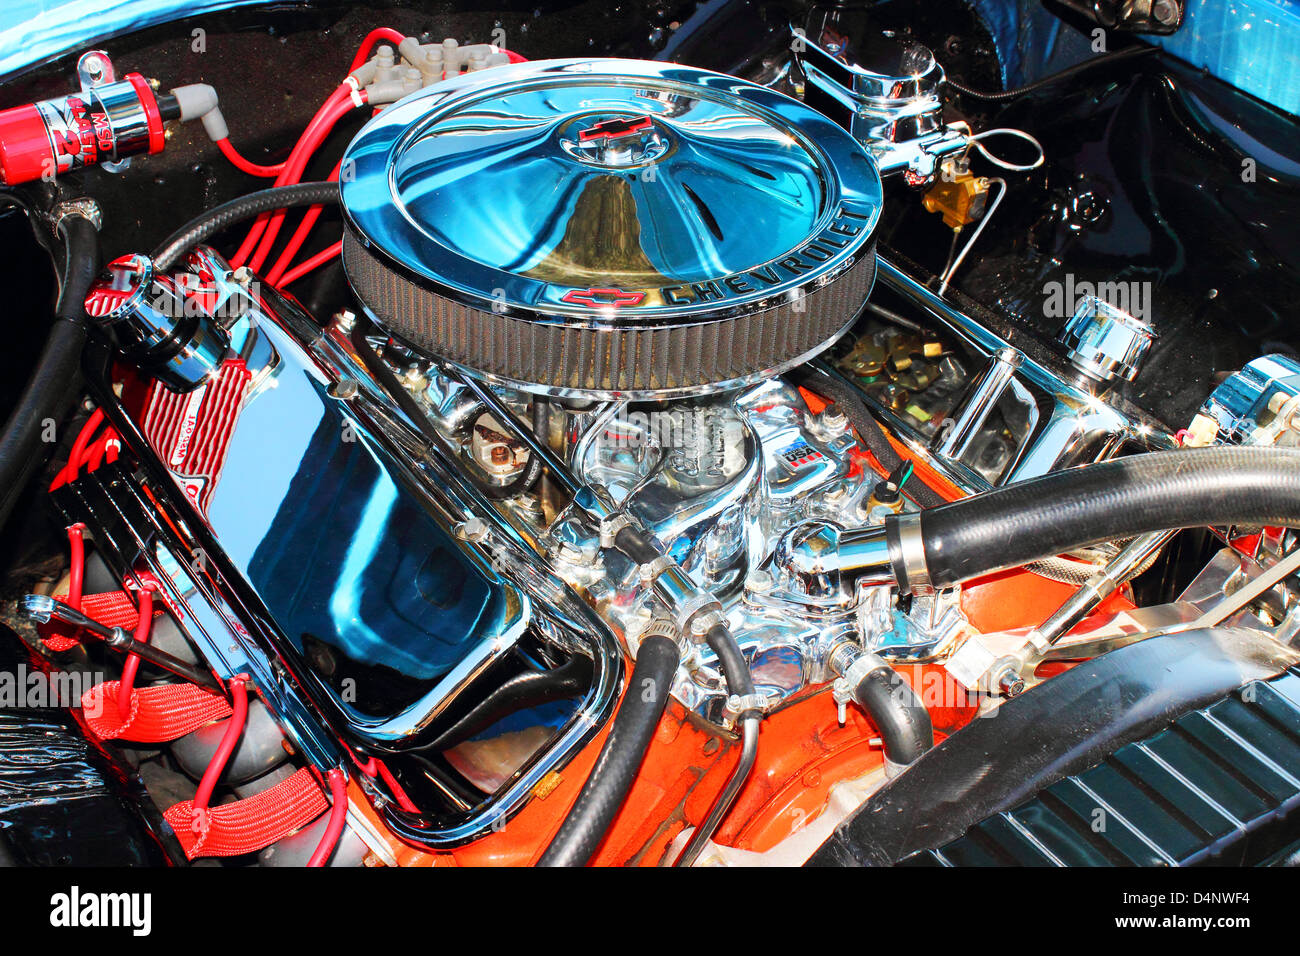 A chromed out Chevy muscle car motor at the Run to the Sun car show in Myrtle Beach, SC on March 15th, 2013 Stock Photo